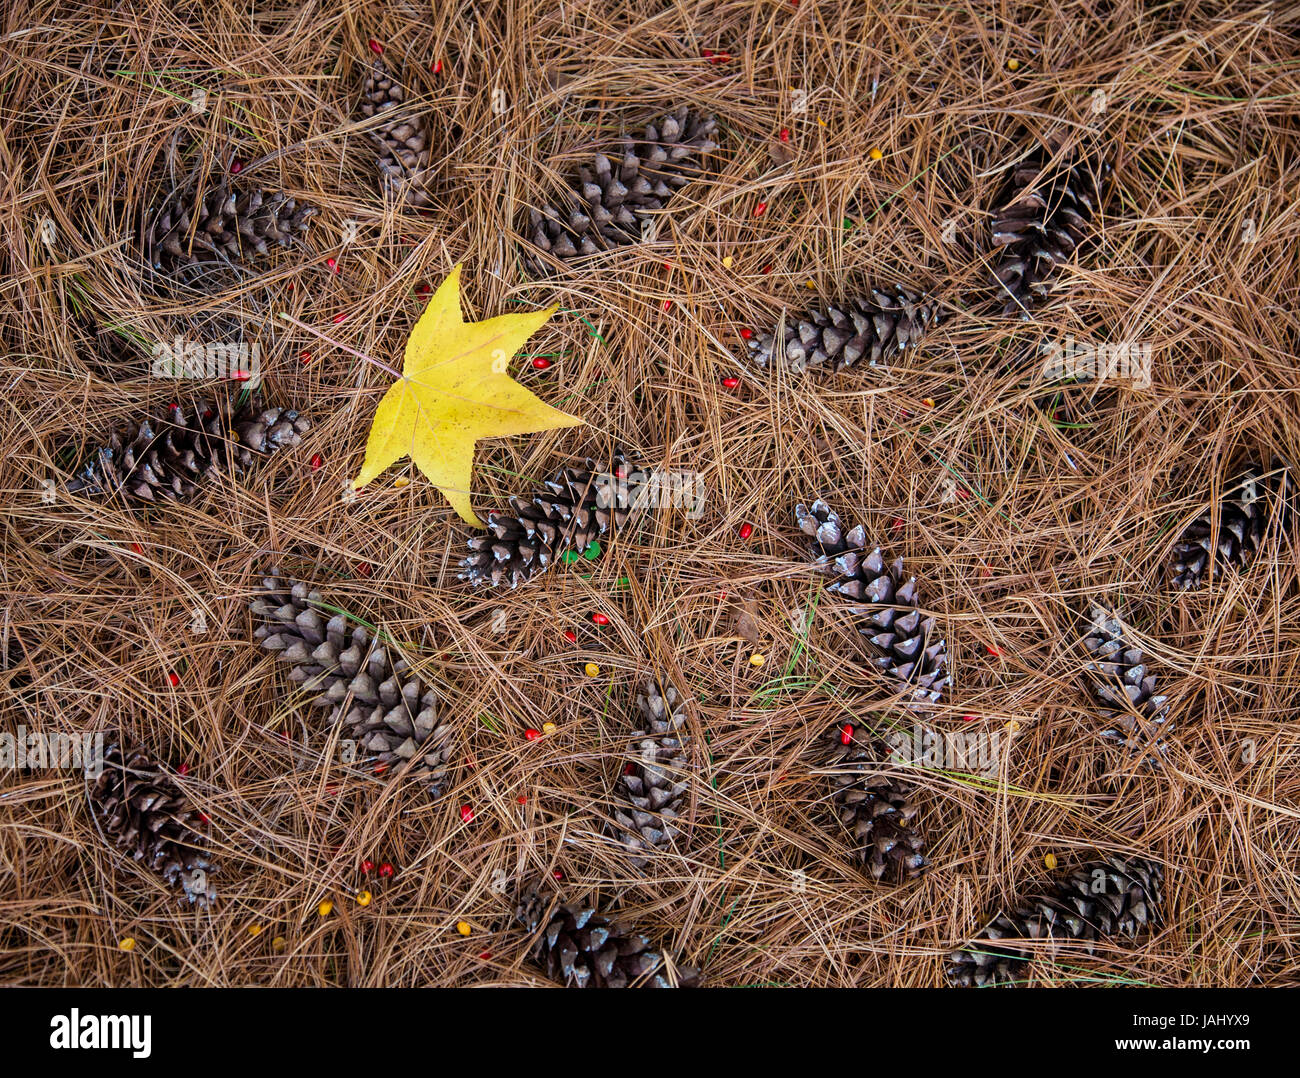 Autumn pinecones, pine needles and one yellow leaf from a Sweet Gum Tree, New England, USA, abstract shapes images autumn leaves enchanting Stock Photo